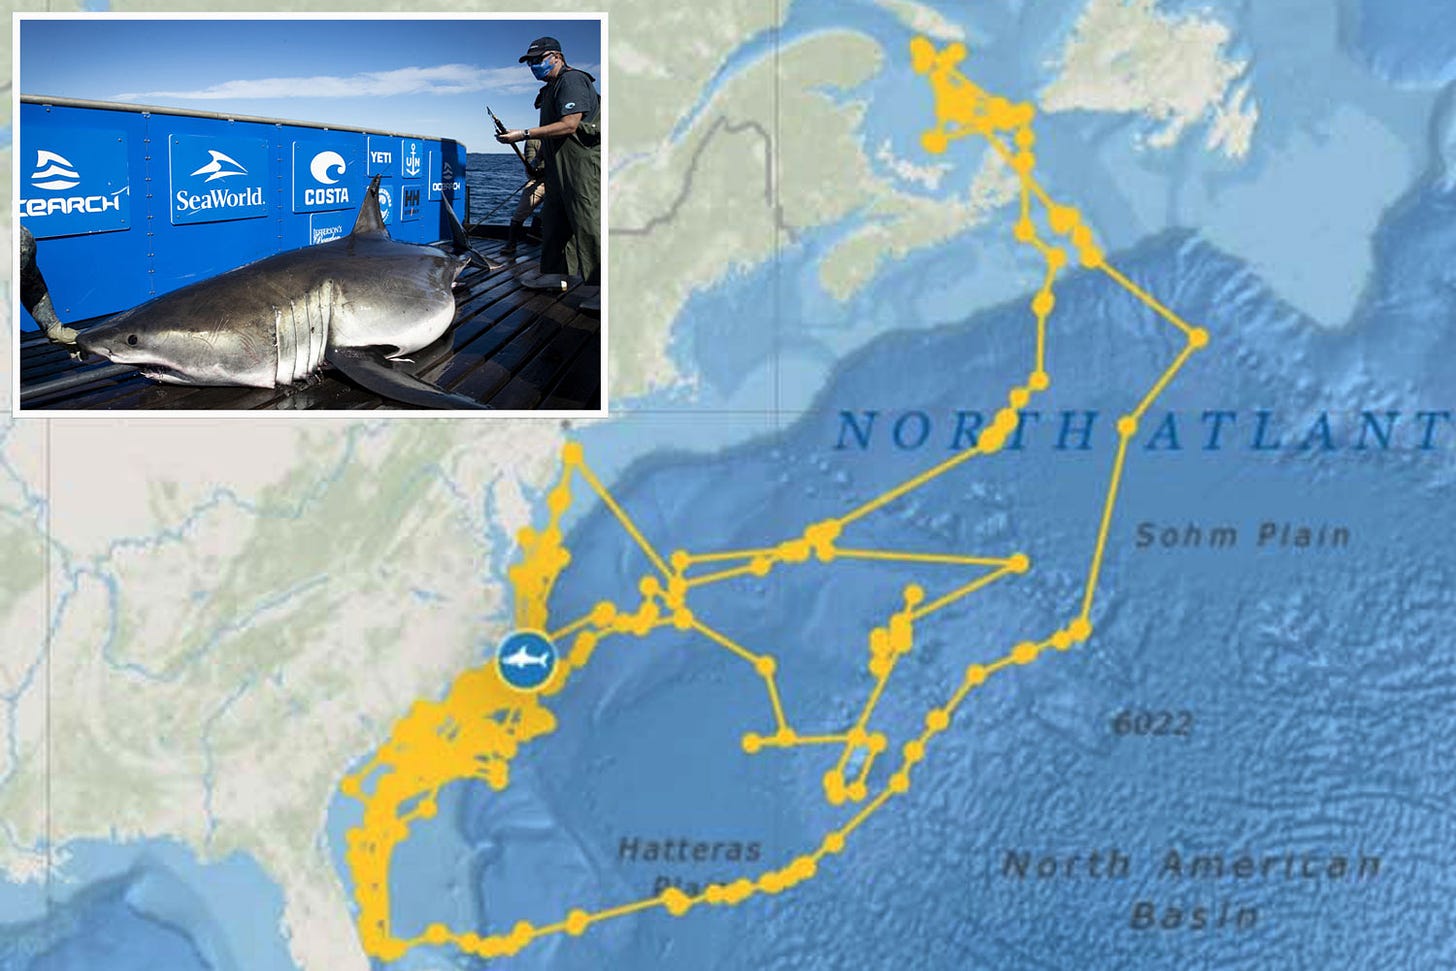 Breton the great white shark draws incredible 'self-portrait' with GPS  tracker while stalking the ocean | The Sun